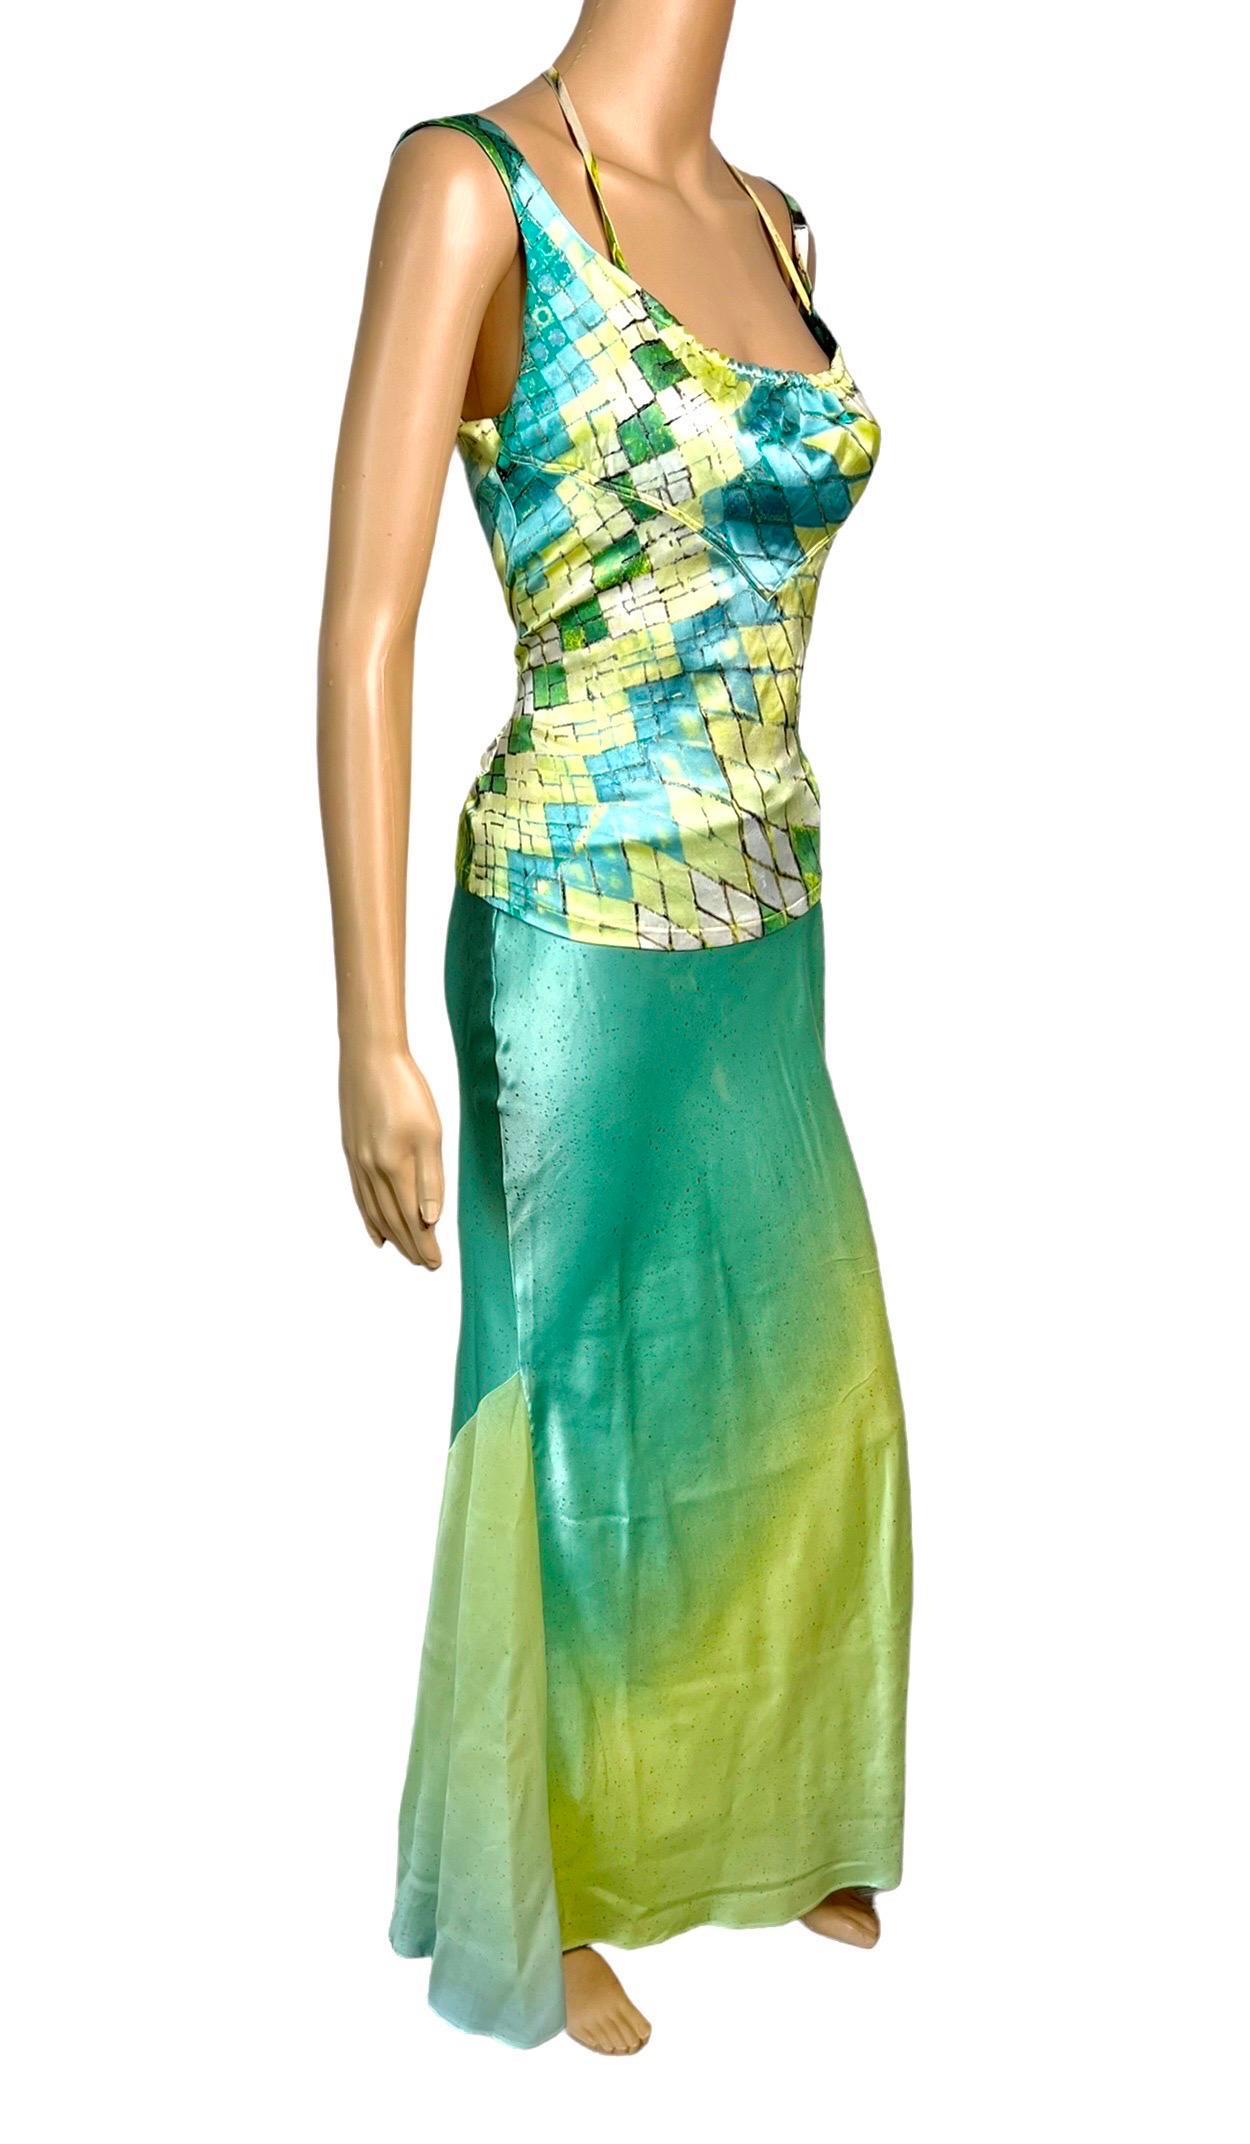 Roberto Cavalli S/S 2004 Feather Embellished Silk Metallic Halter Top & Maxi Skirt Ensemble 2 Piece Set Size S

Please note the size tag has been removed from the skirt.

